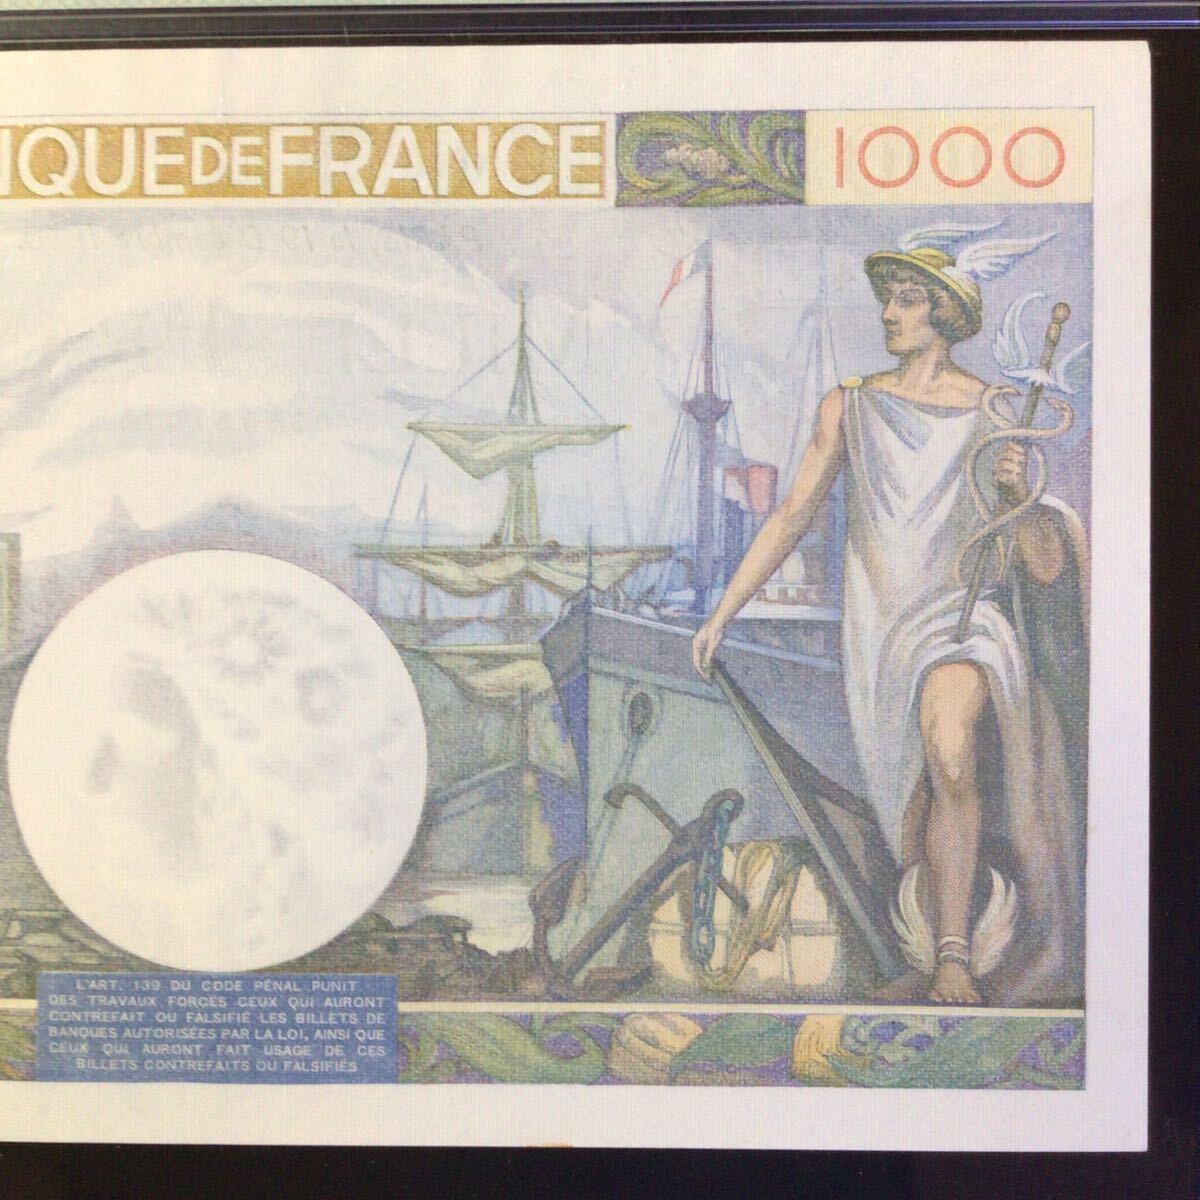 World Banknote Grading FRANCE 1000 Francs【1940】『PMG Grading Choice About Uncirculated 58』_画像7